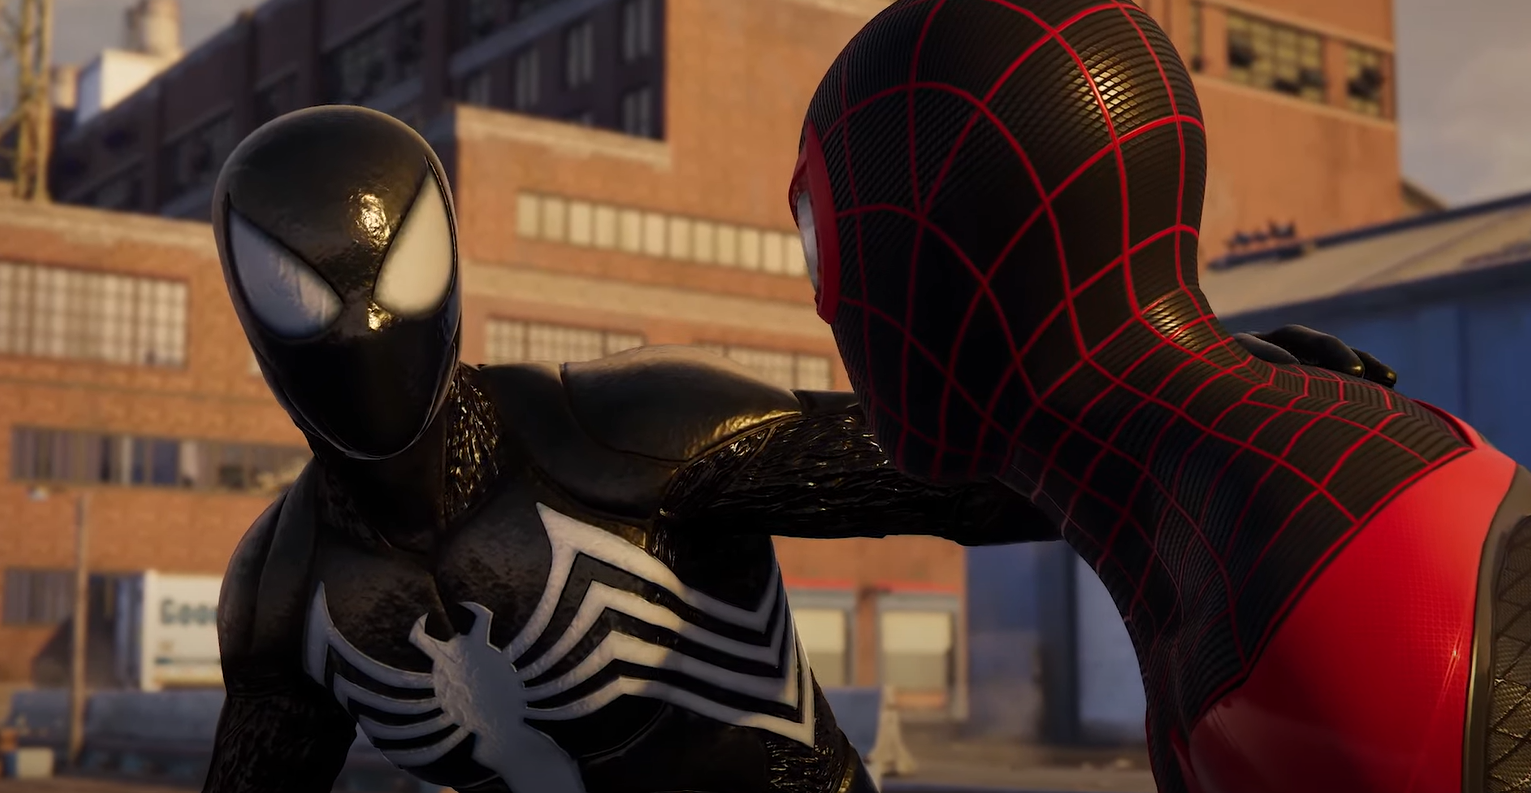 Marvel's Spider-Man 2 is shaping up to be the Spidey game of my dreams